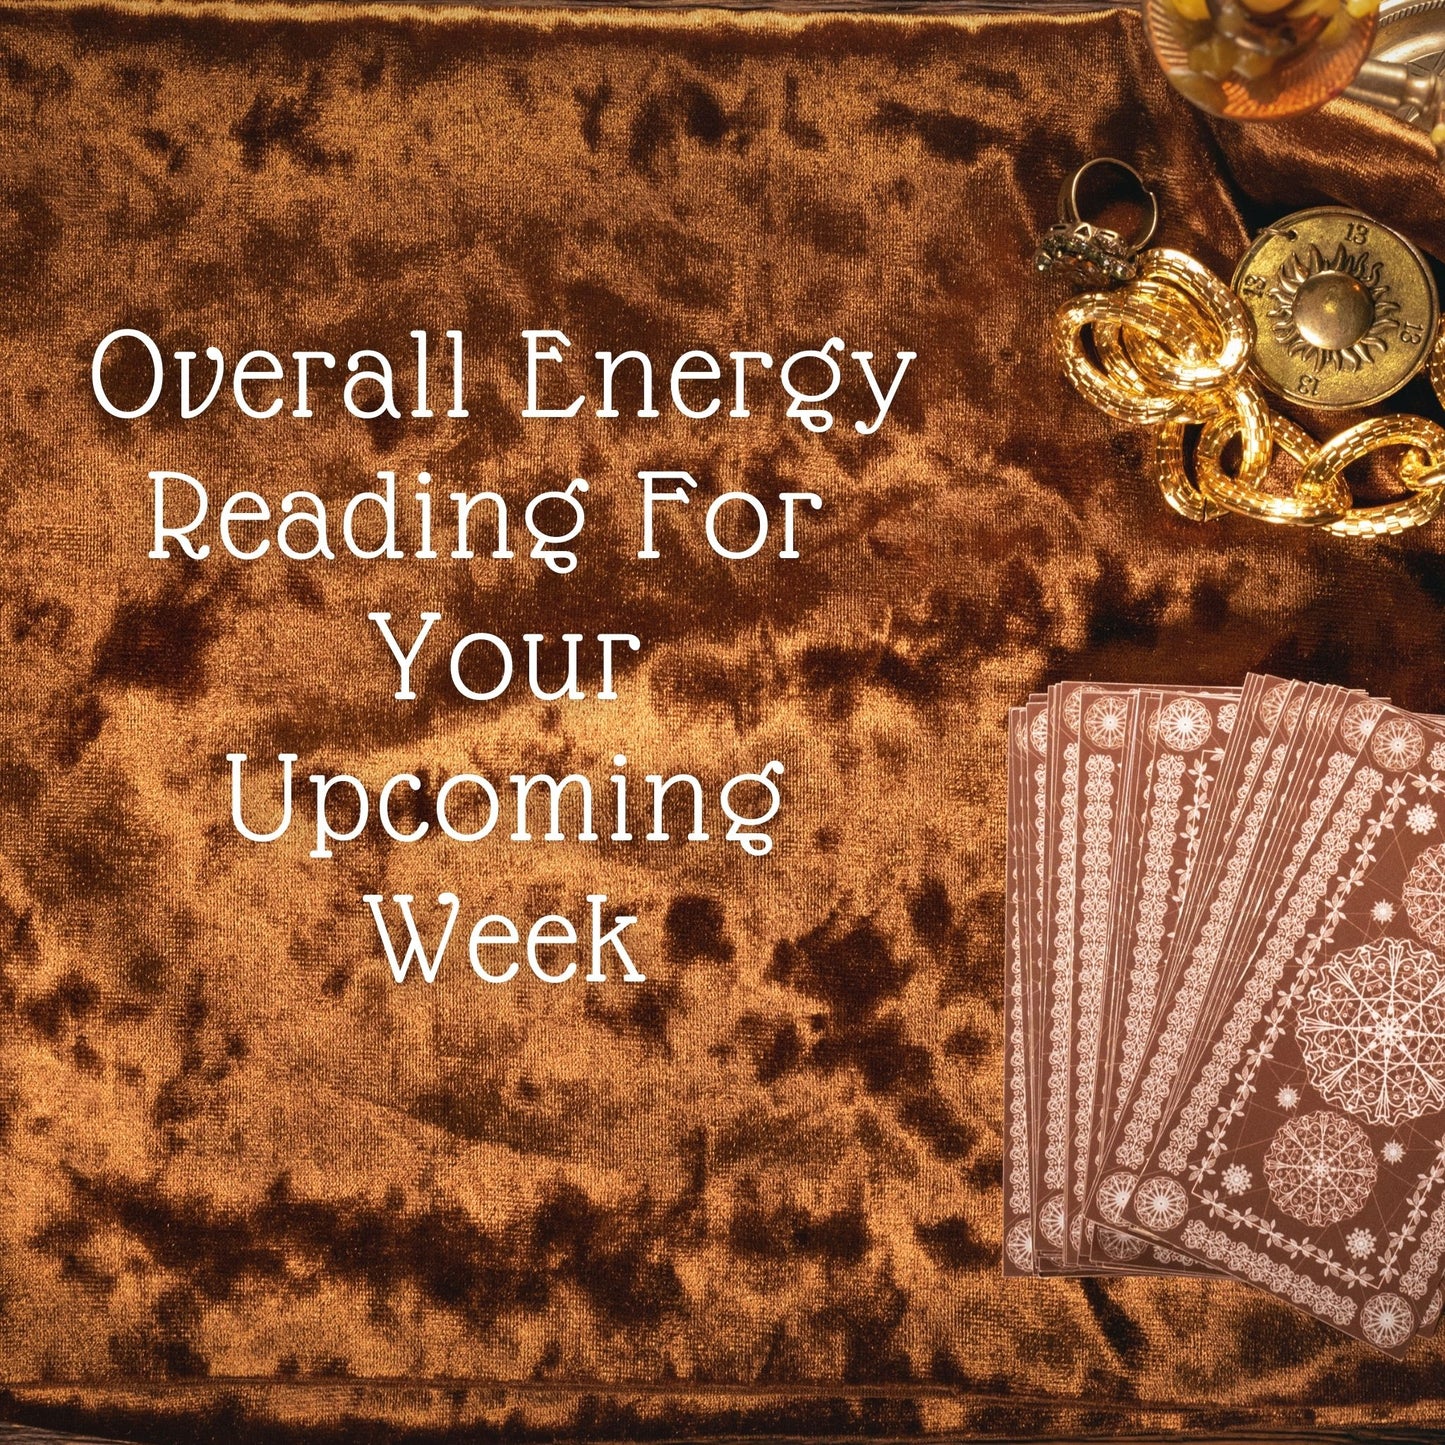 Overall Energy Reading For Your Upcoming Week